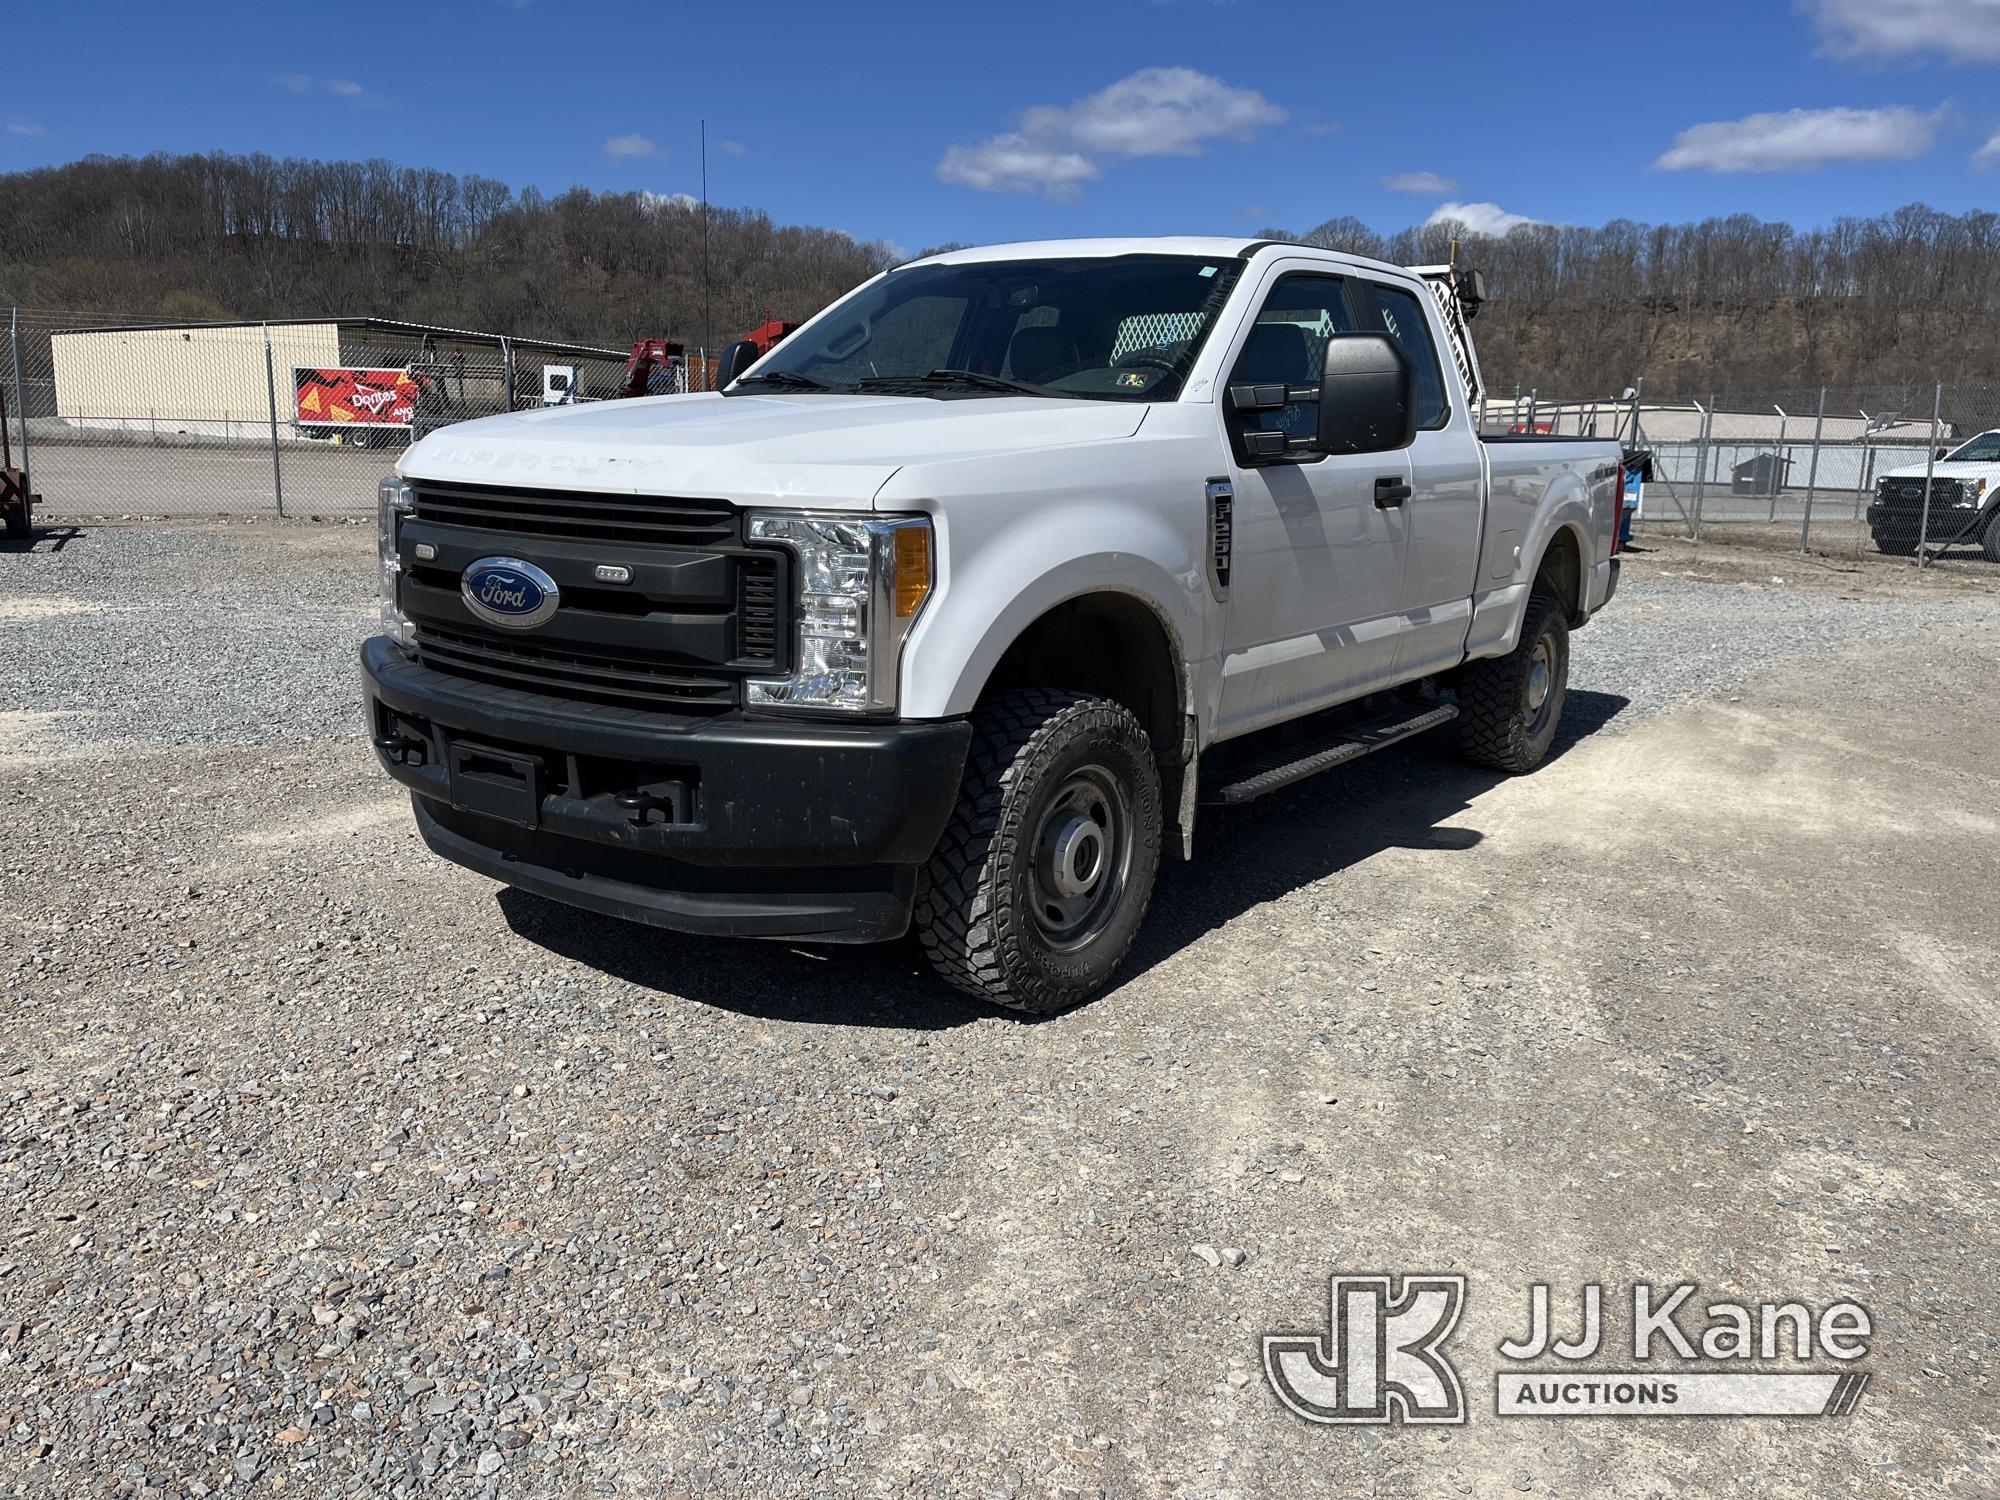 (Smock, PA) 2017 Ford F250 4x4 Extended-Cab Pickup Truck Runs & Moves, Rust & Paint Damage